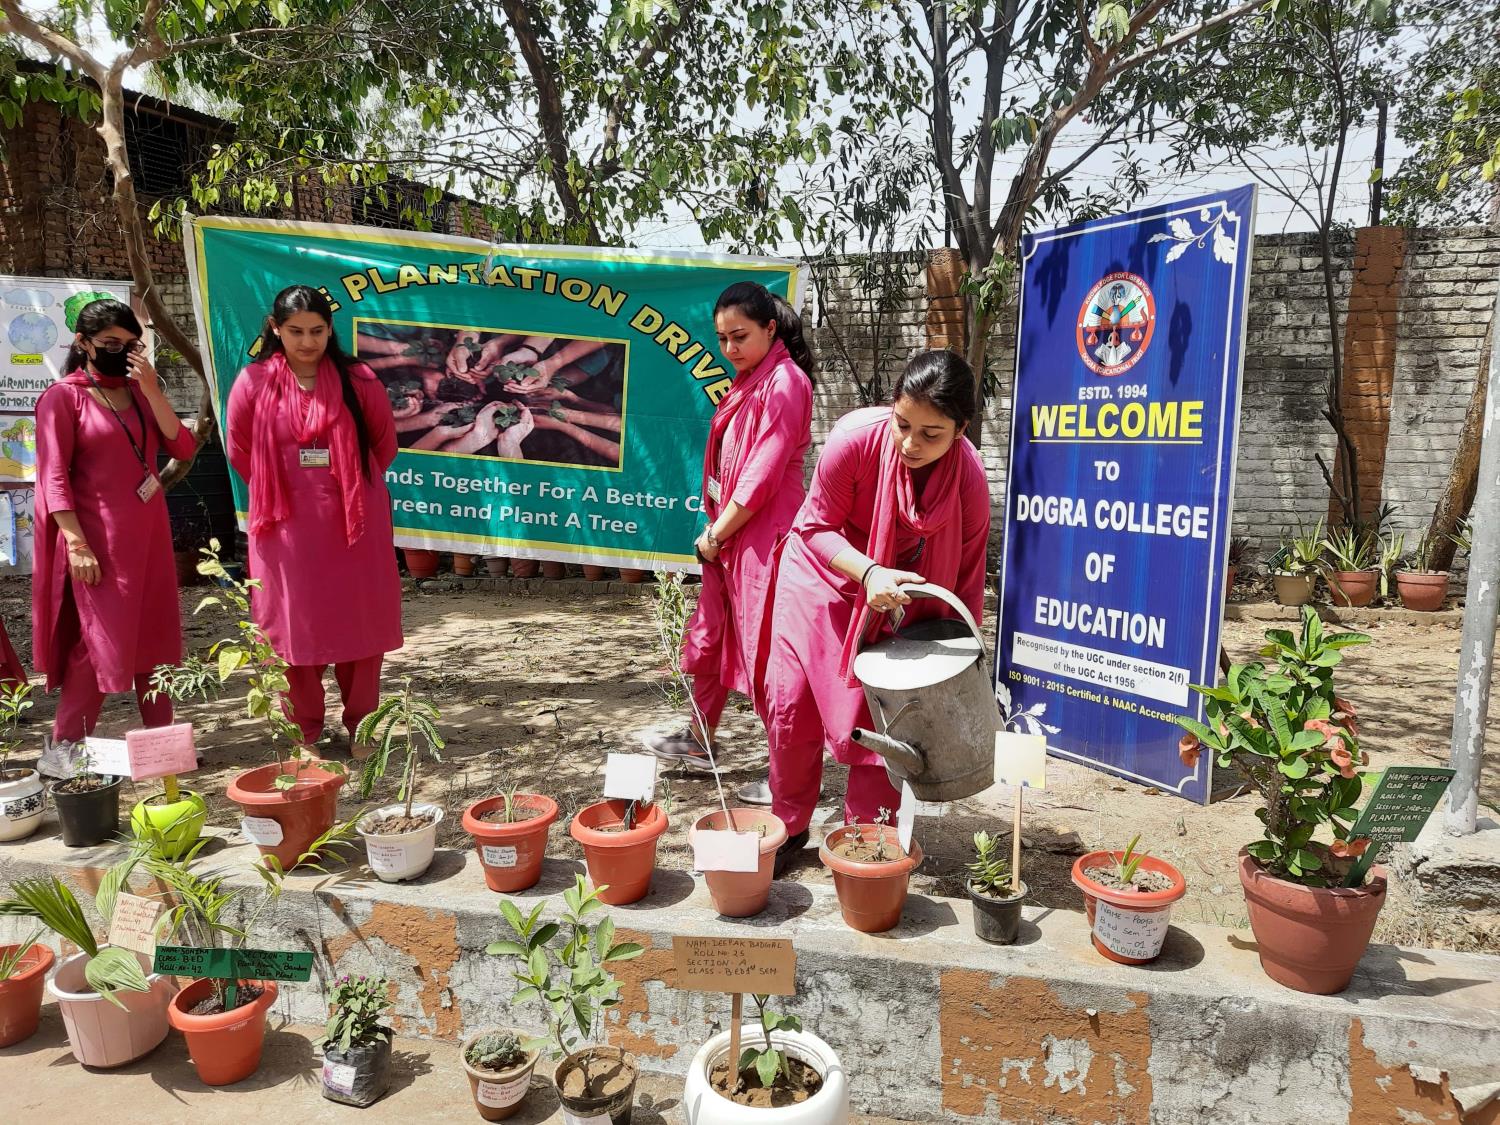 Plantation Drive organised by DCE